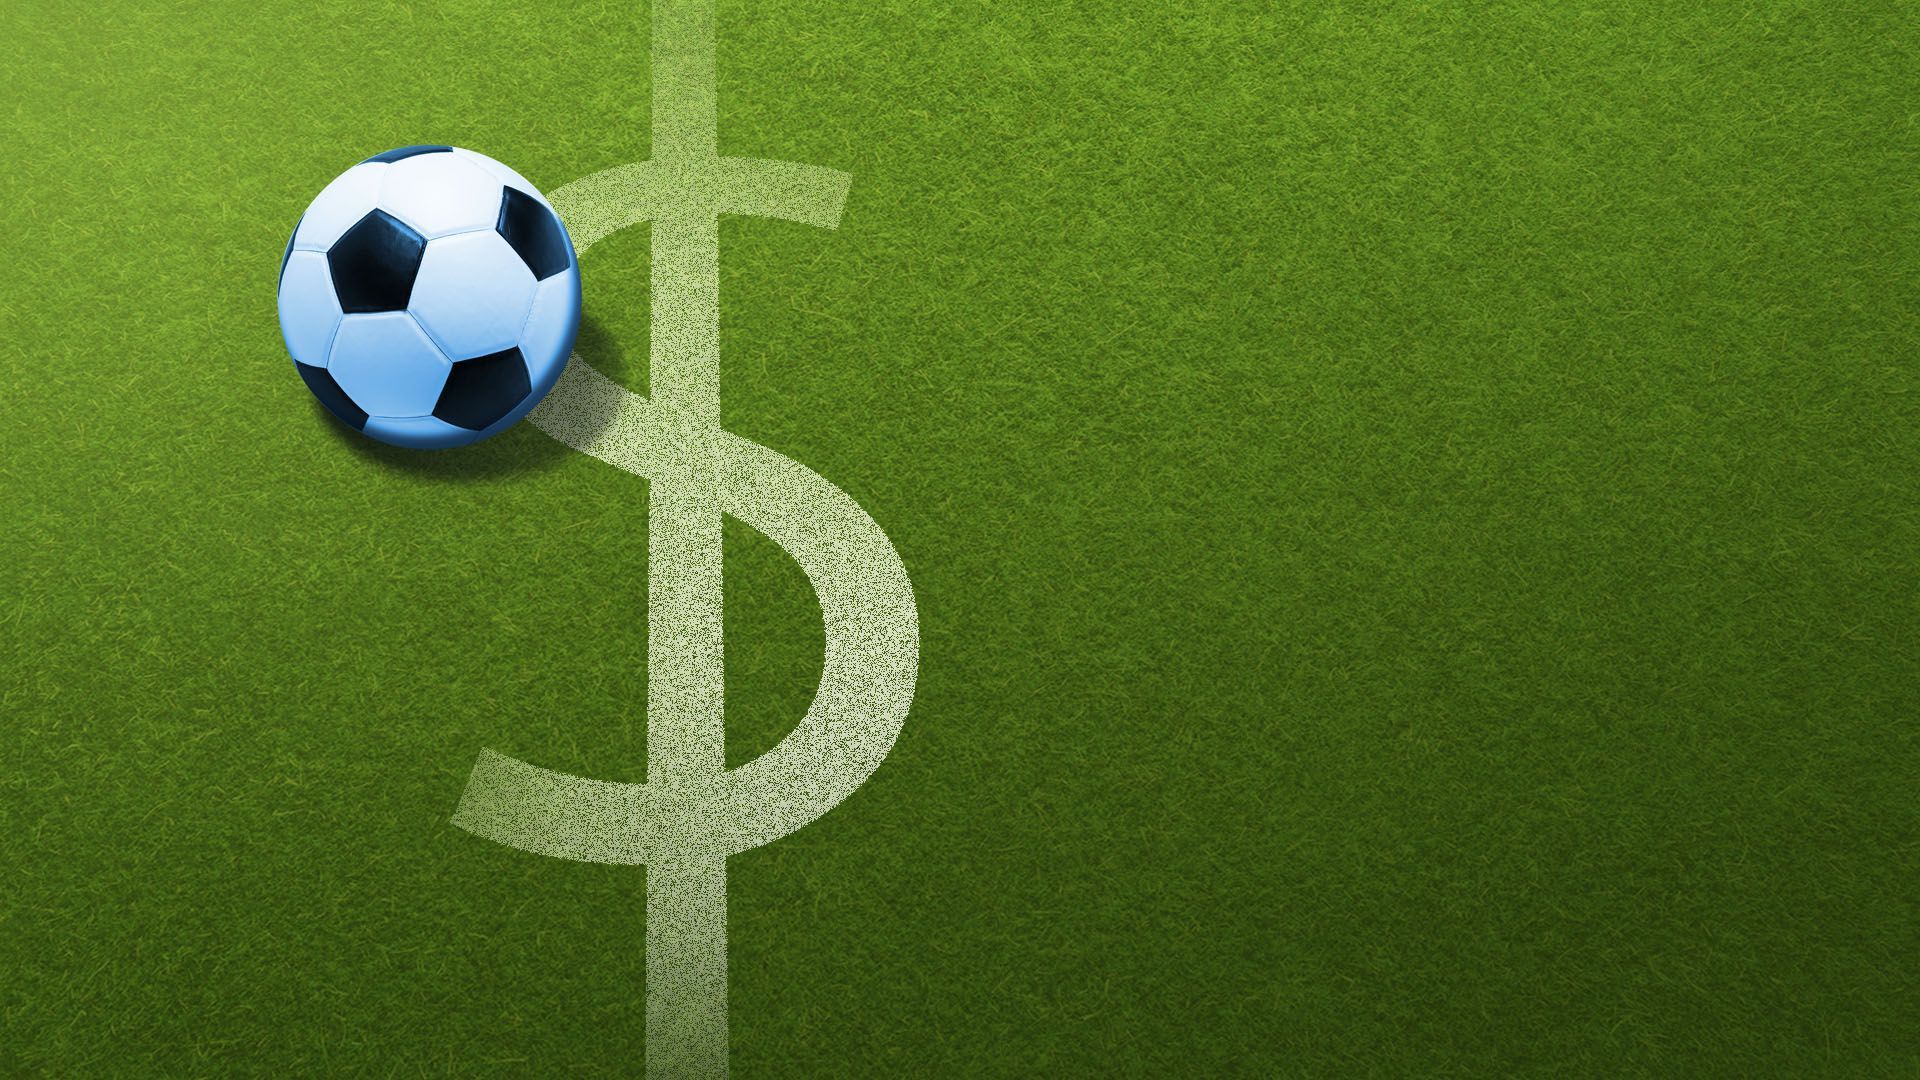 Illustration of a soccer ball on a soccer pitch with a dollar sign line